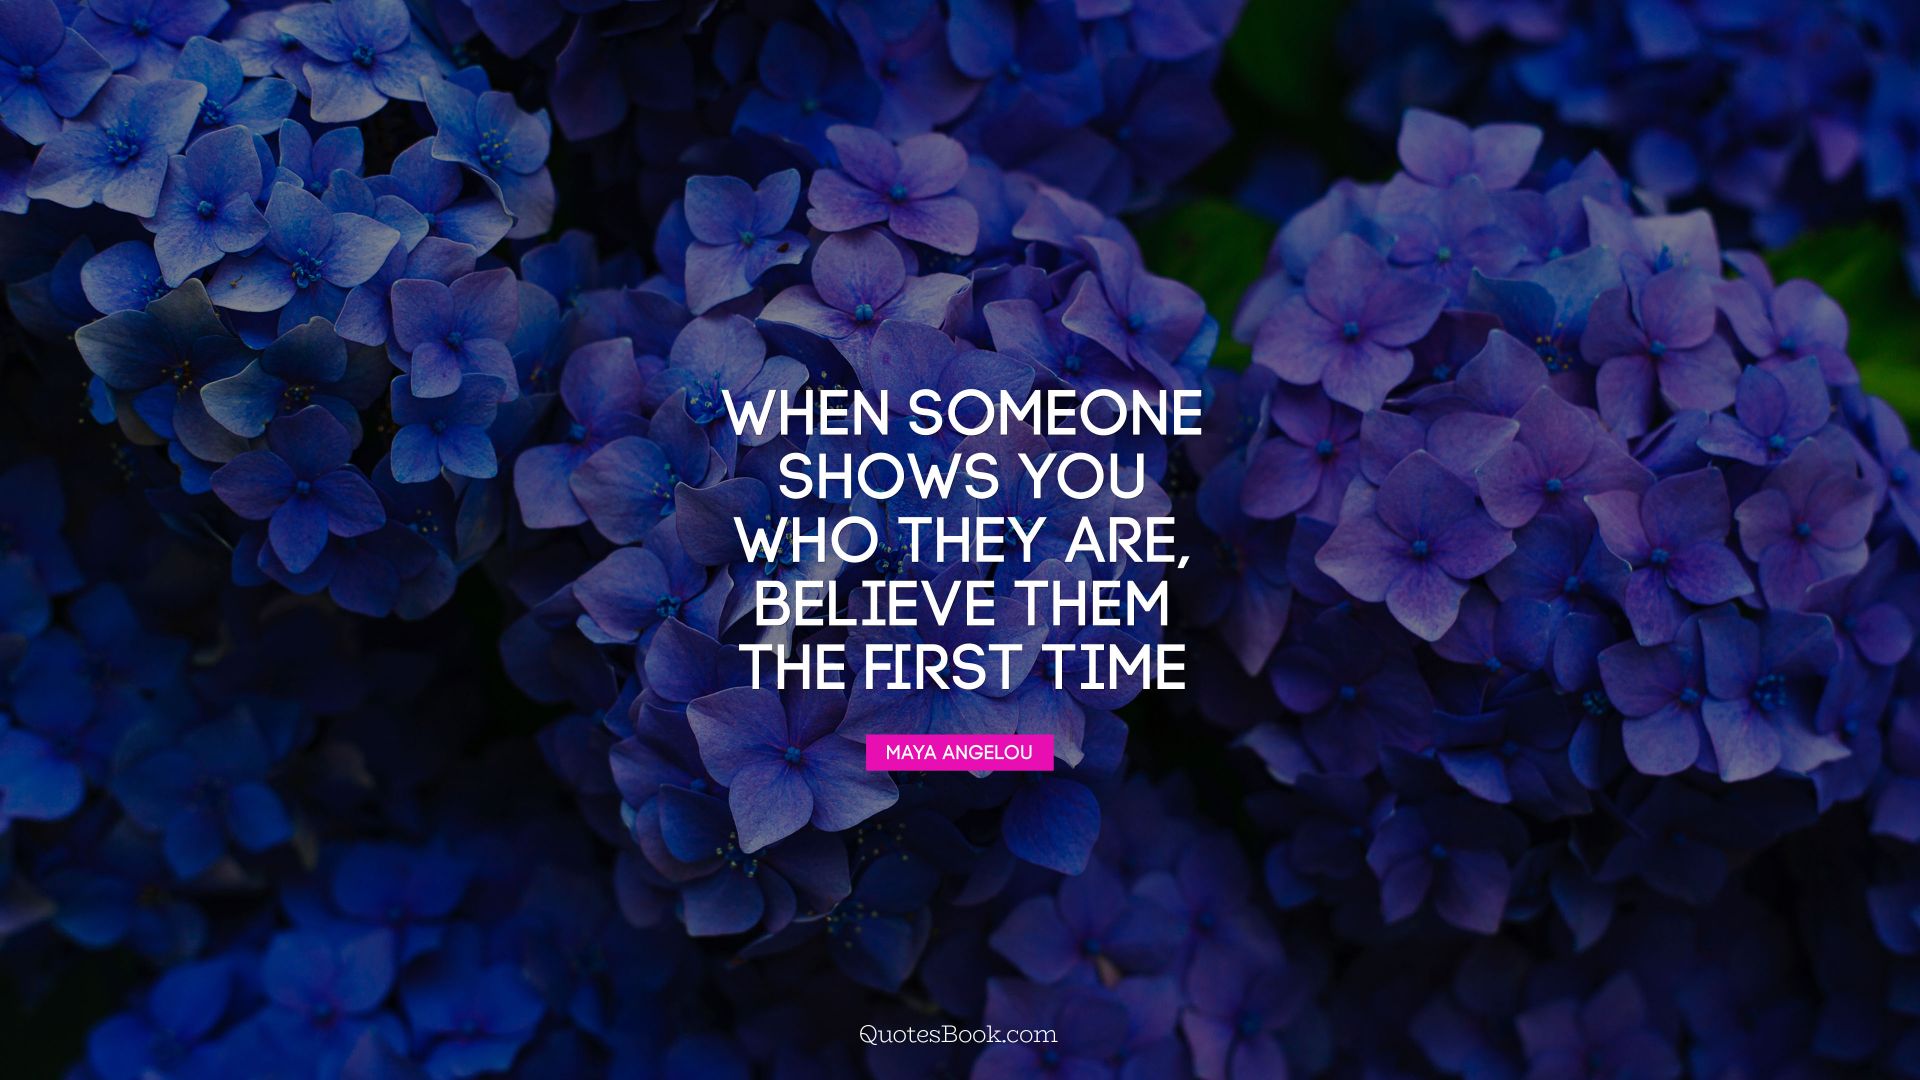 When someone shows you who they are, believe them the first time. - Quote by Maya Angelou